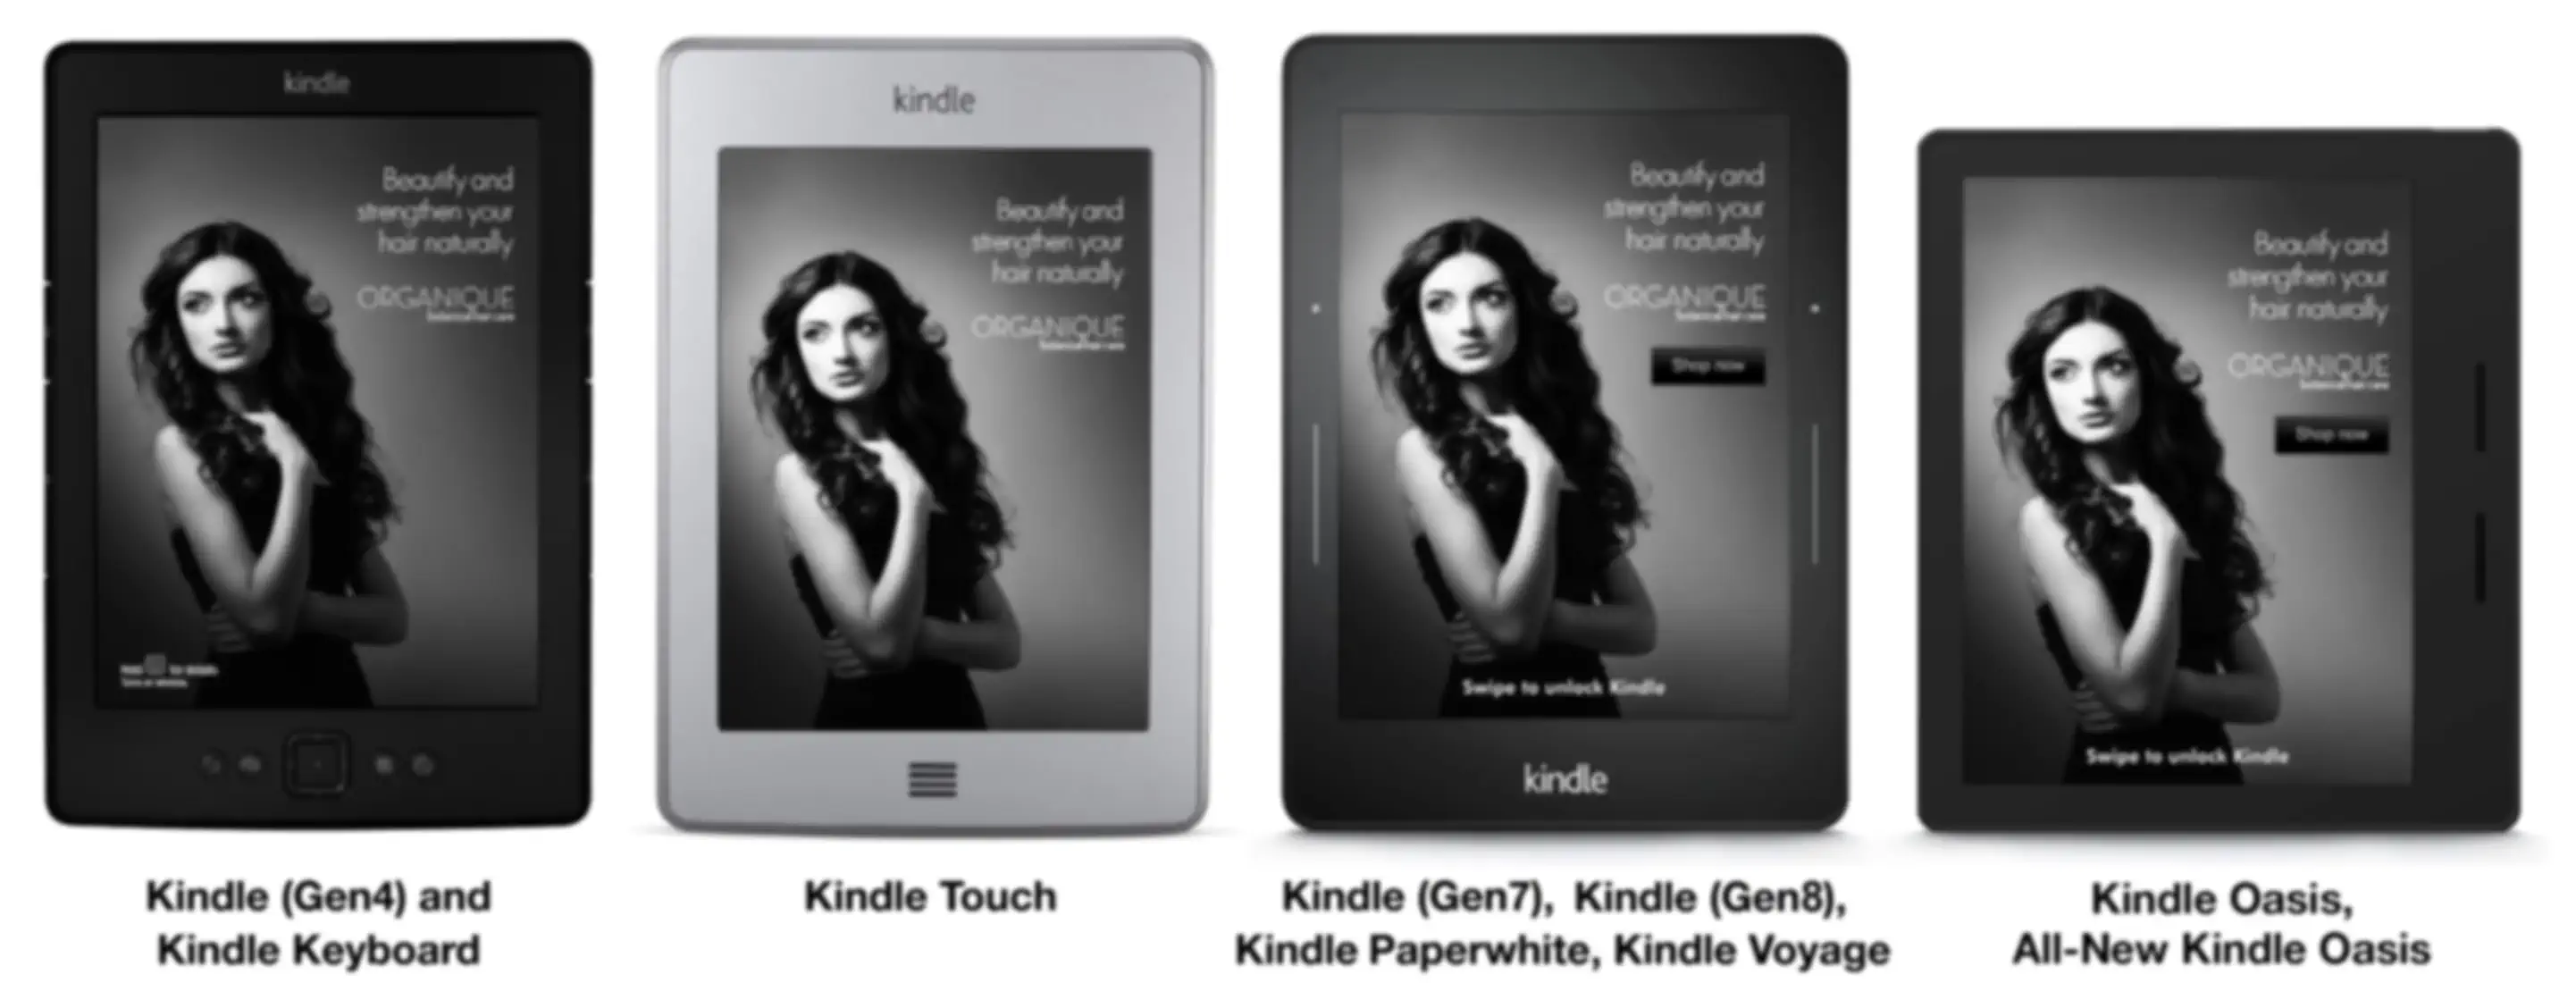 Examples of CTA on different Kindle devices